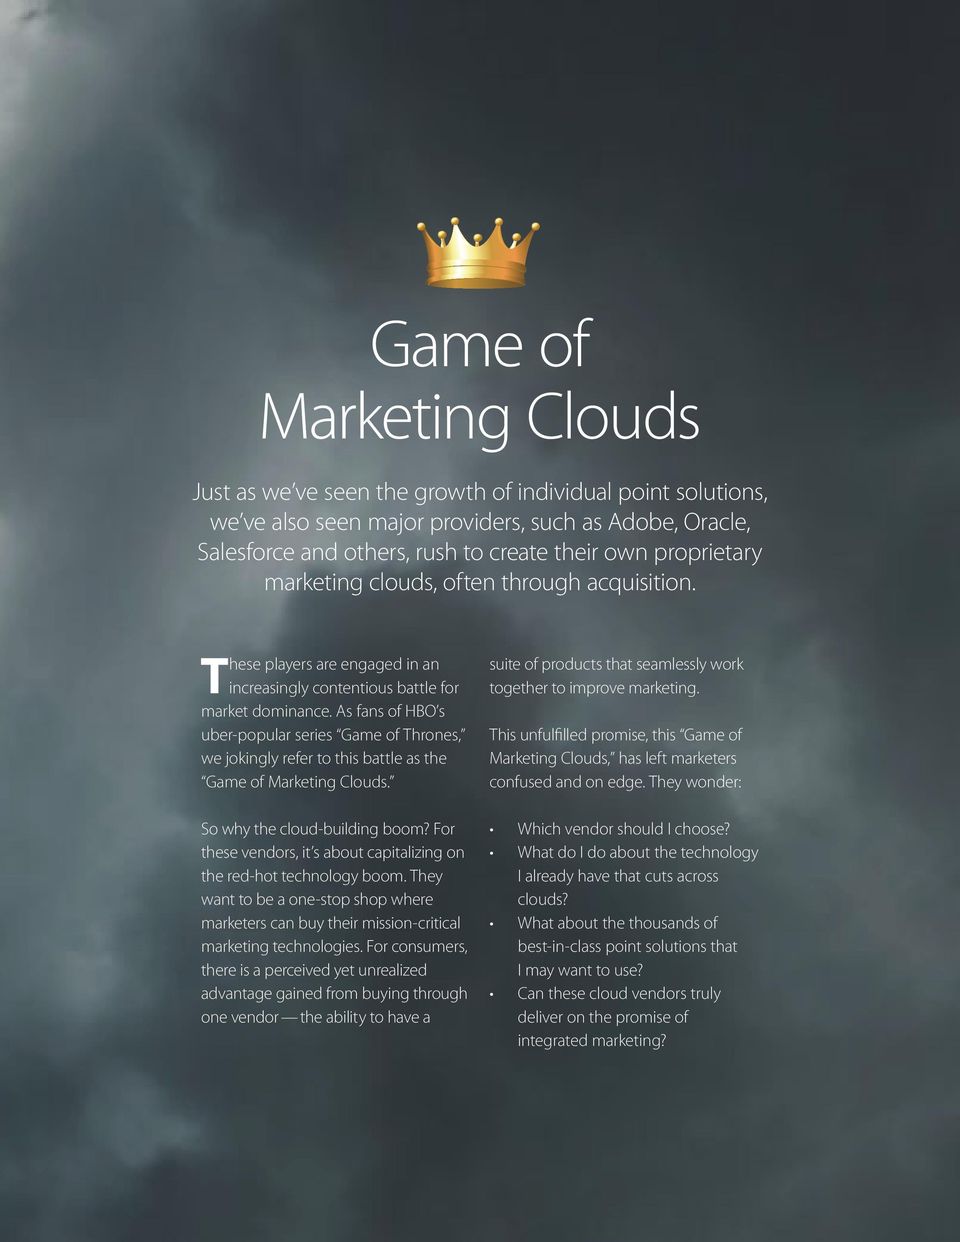 As fans of HBO s uberpopular series Game of Thrones, we jokingly refer to this battle as the Game of Marketing Clouds. So why the cloudbuilding boom?